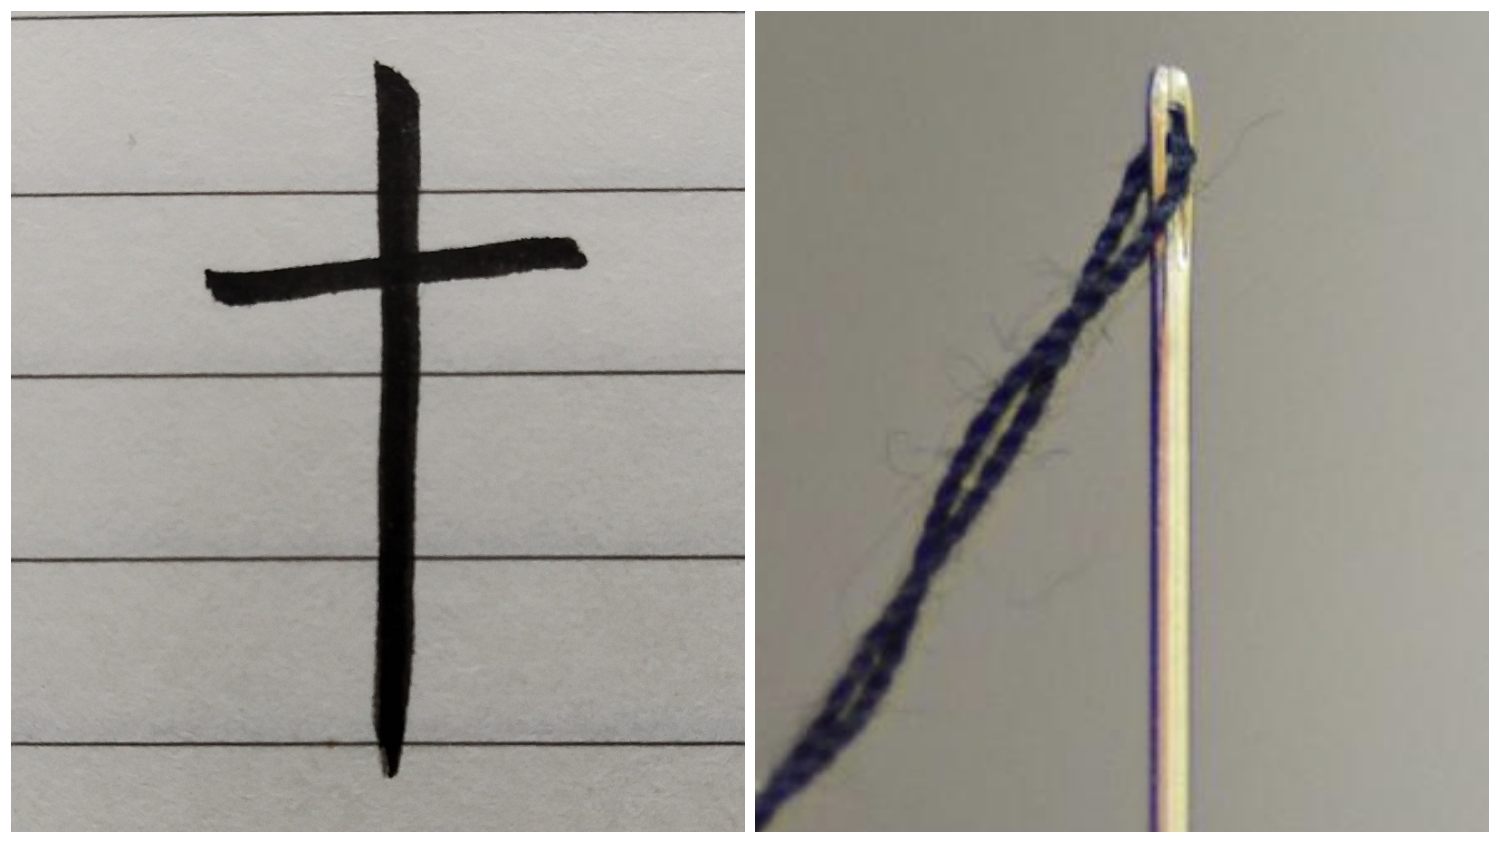 This way of writing the character for needle shows a difficult task, threading a needle!